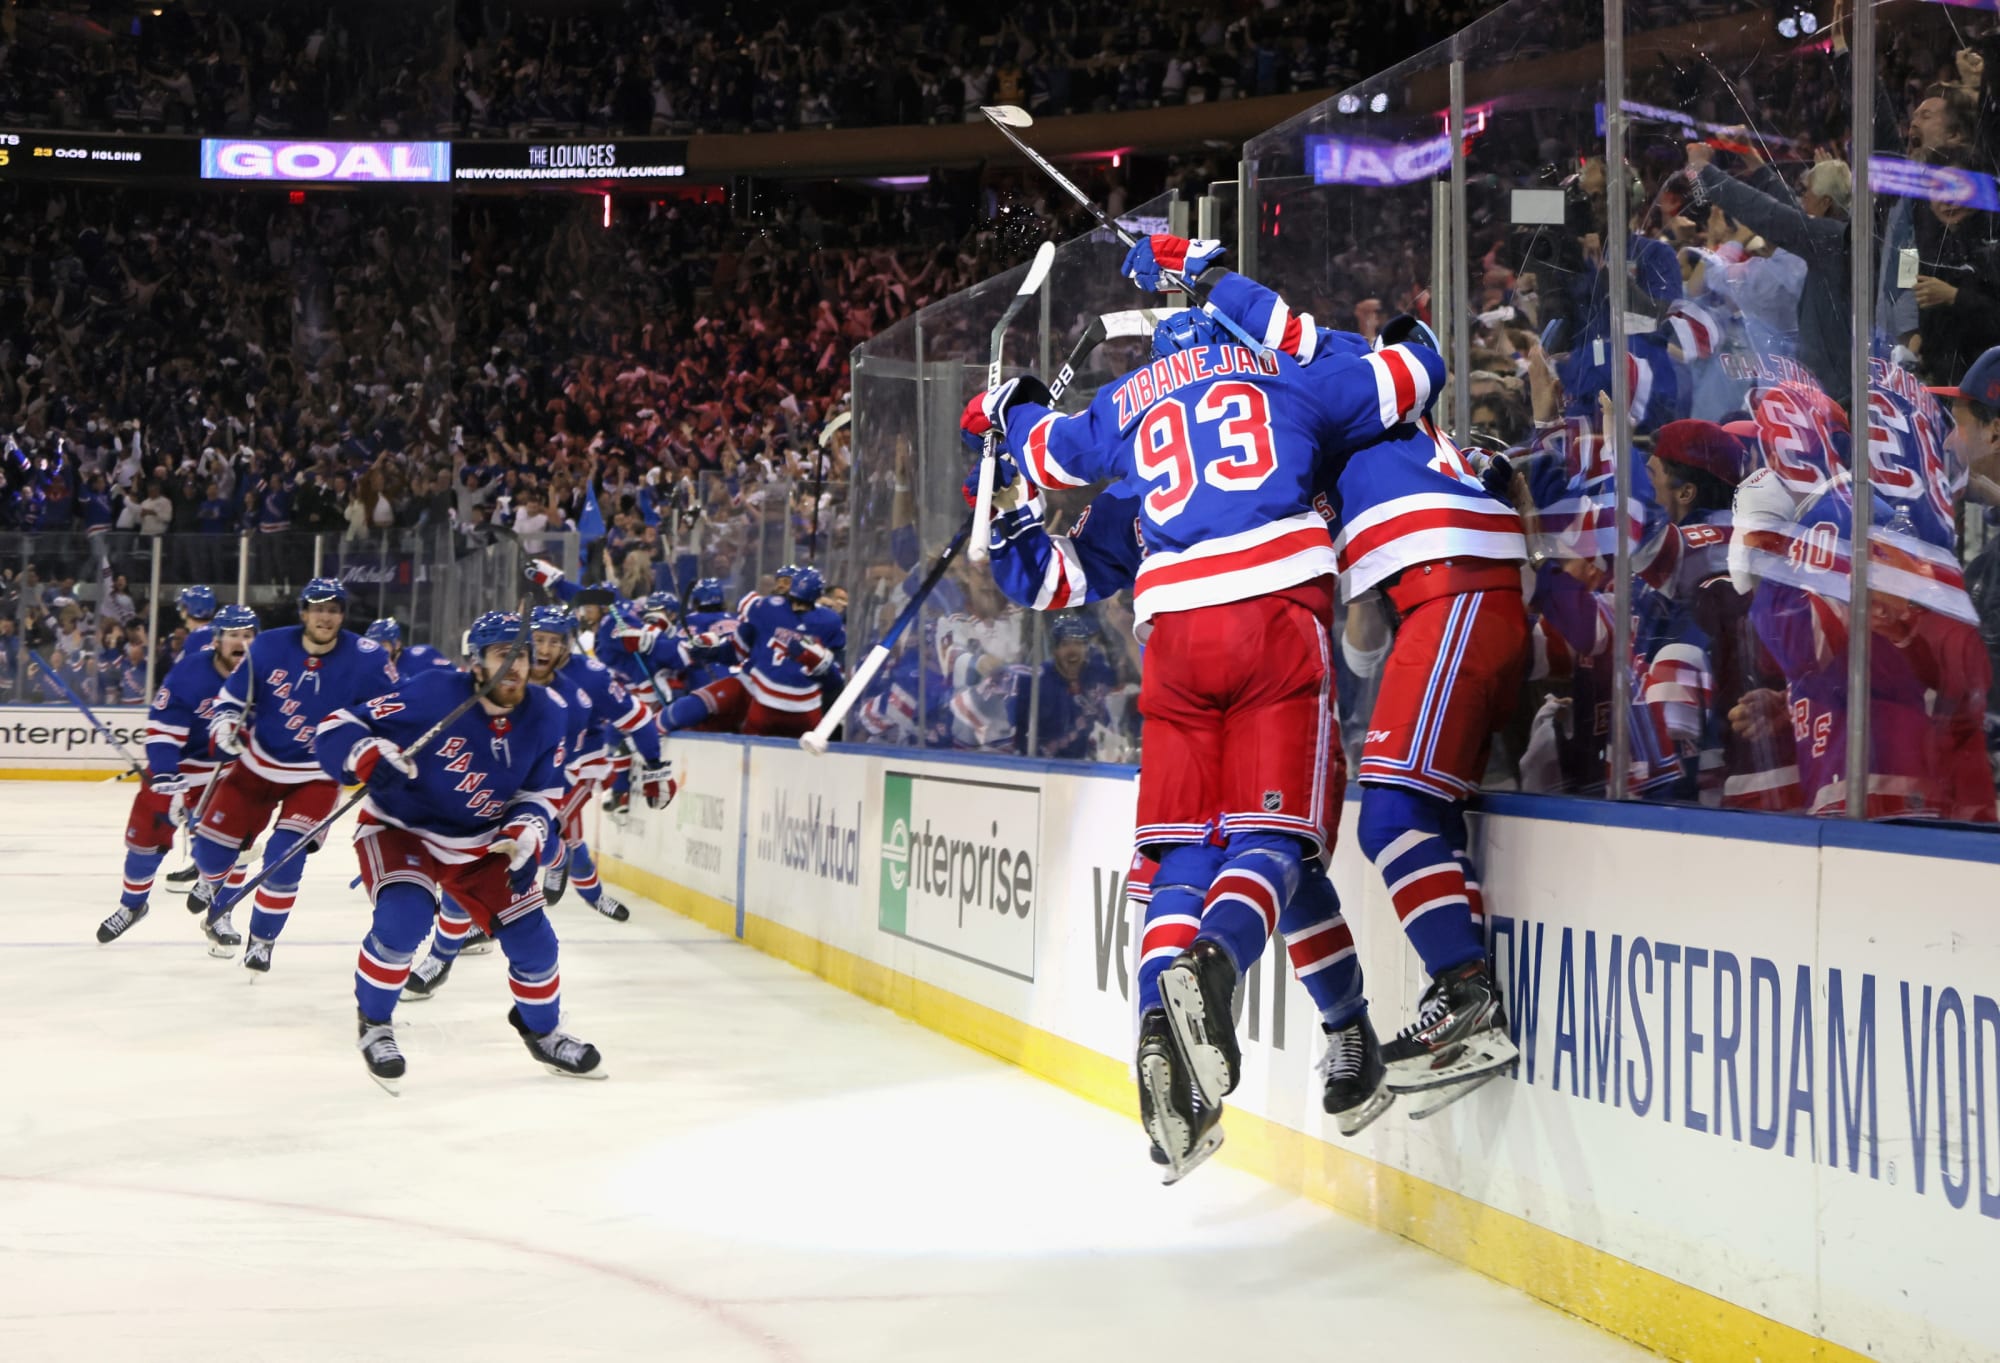 New York Rangers fans bottle magical Game 7 experience